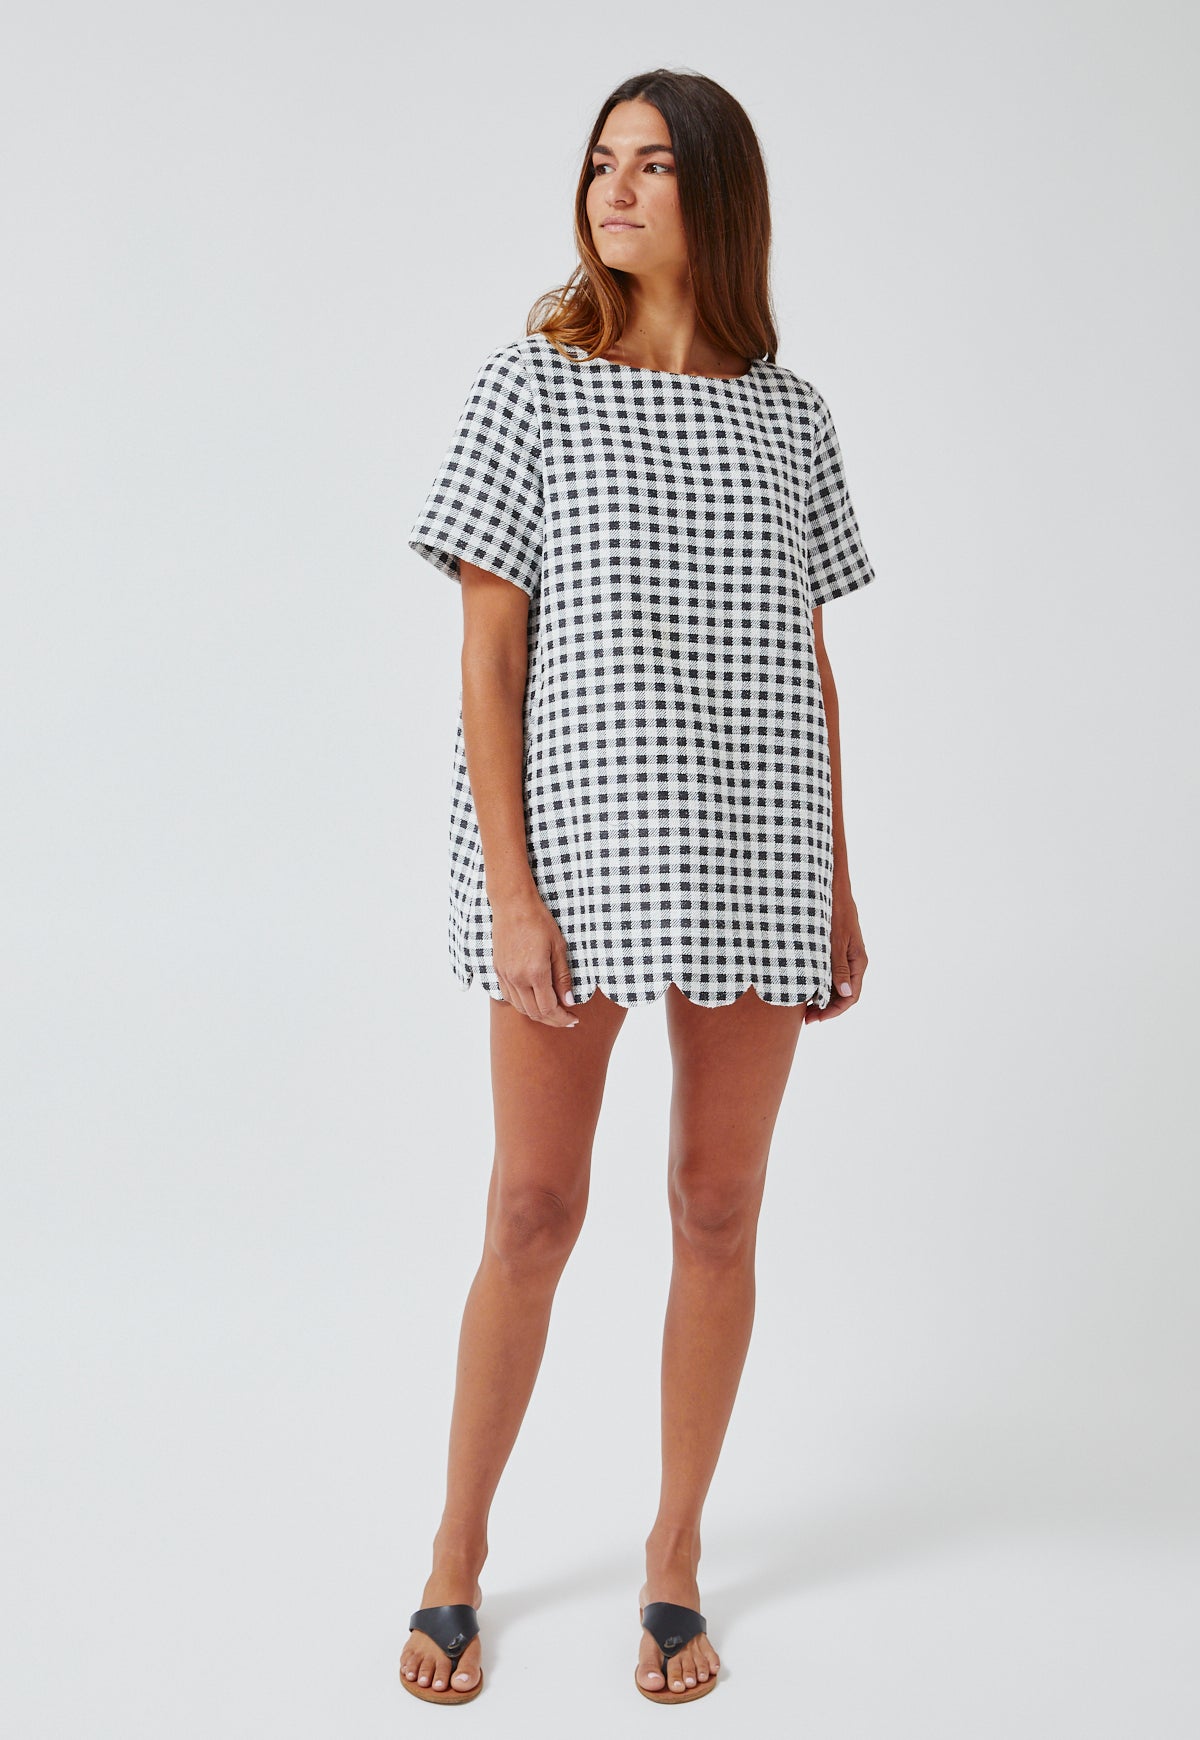 THE SCALLOP A-LINE MINI DRESS in GINGHAM BOUCLE COTTON